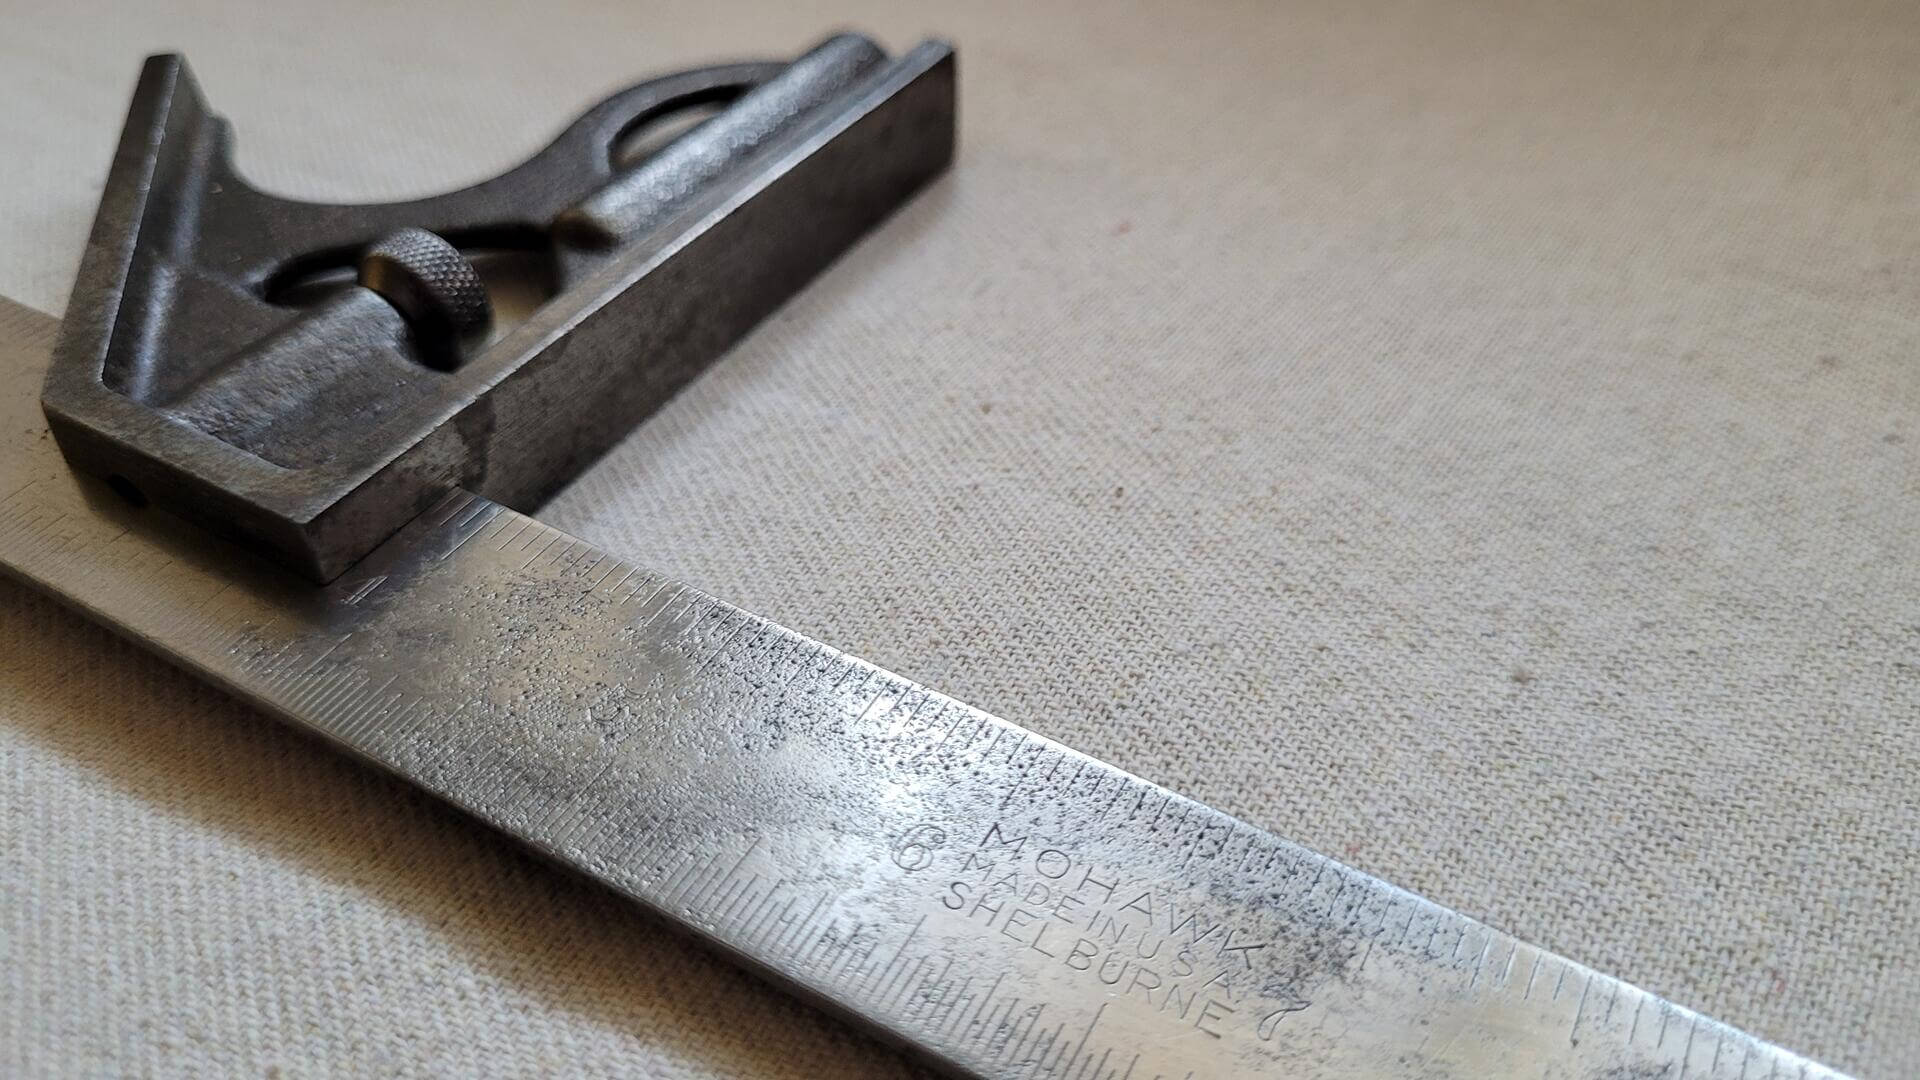 Vintage Mohawk Shelburne steel combination try square 12 inches long - Antique 1930s miller Falls made in USA collectible marking and measuring hand tools